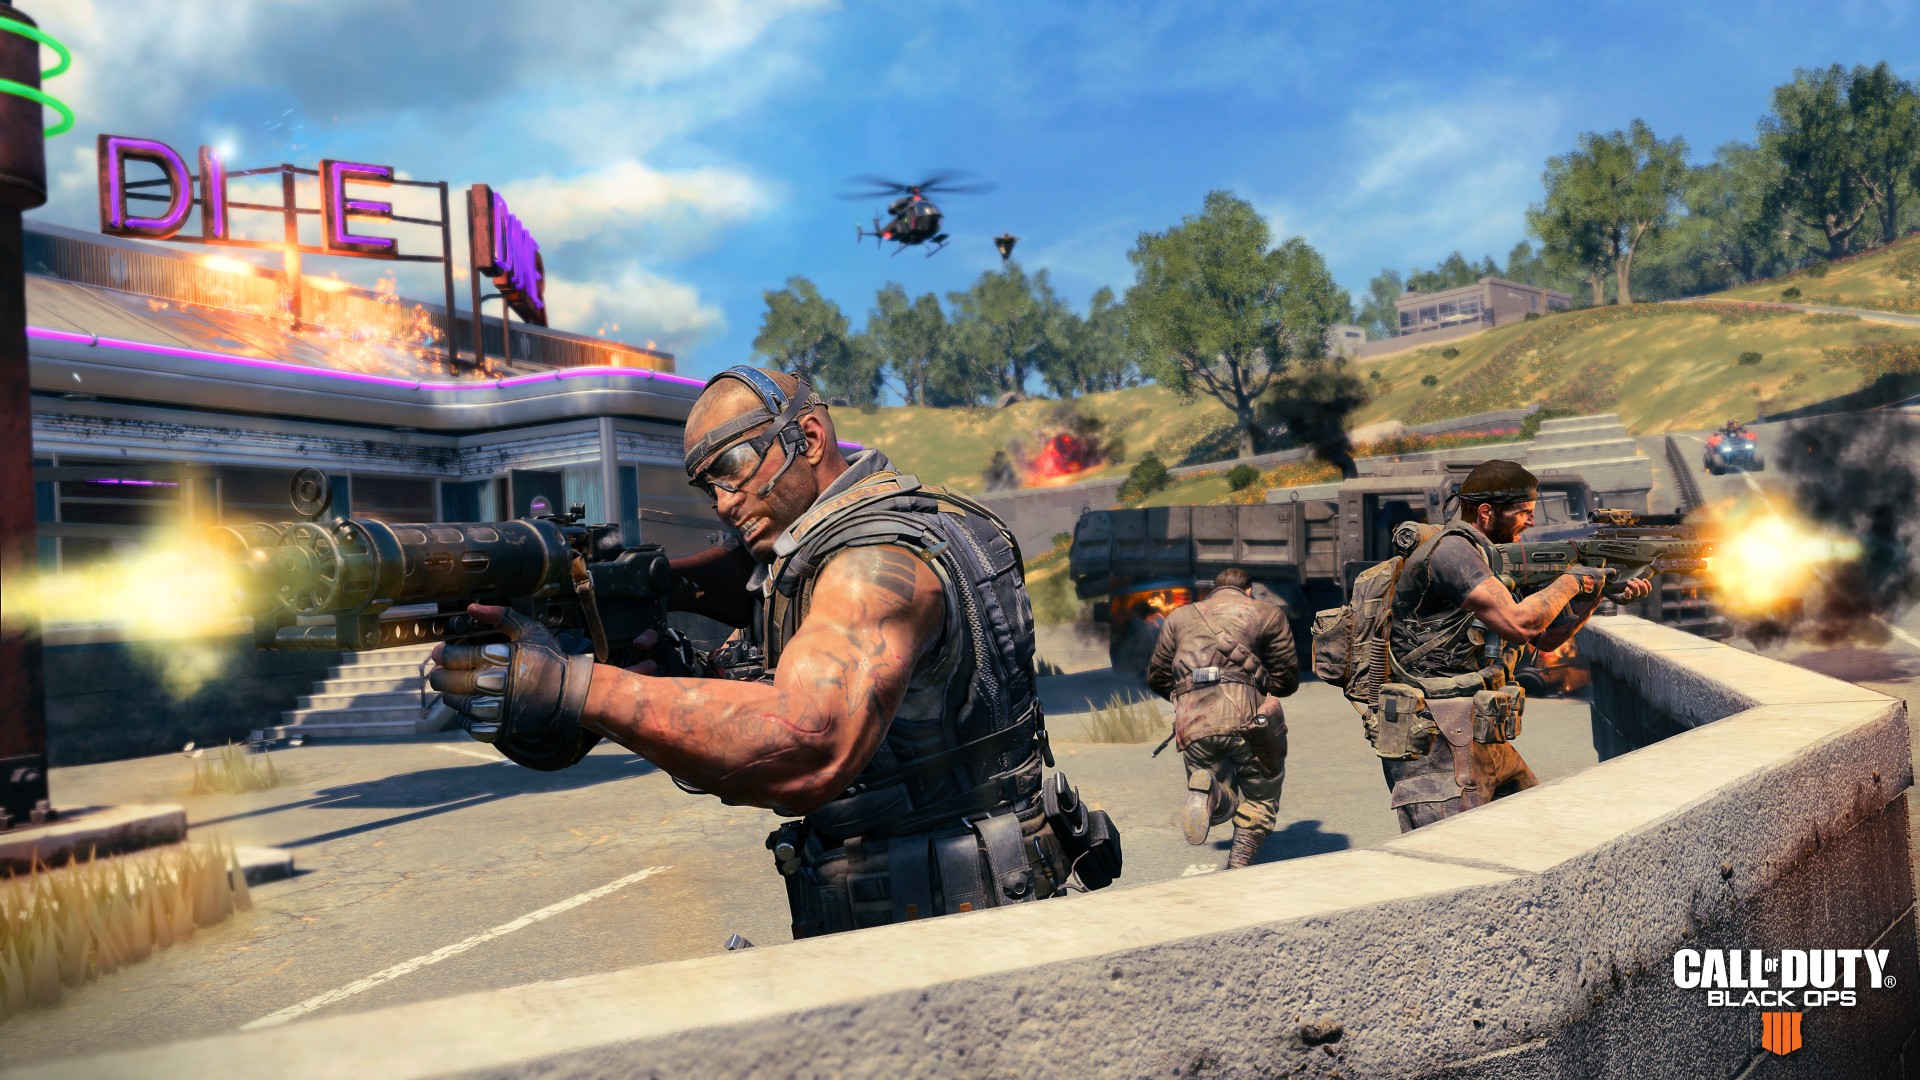 Play free trial of Call of Duty: Black Ops 4 Blackout now on Xbox One Blackout-Screen-3.jpg